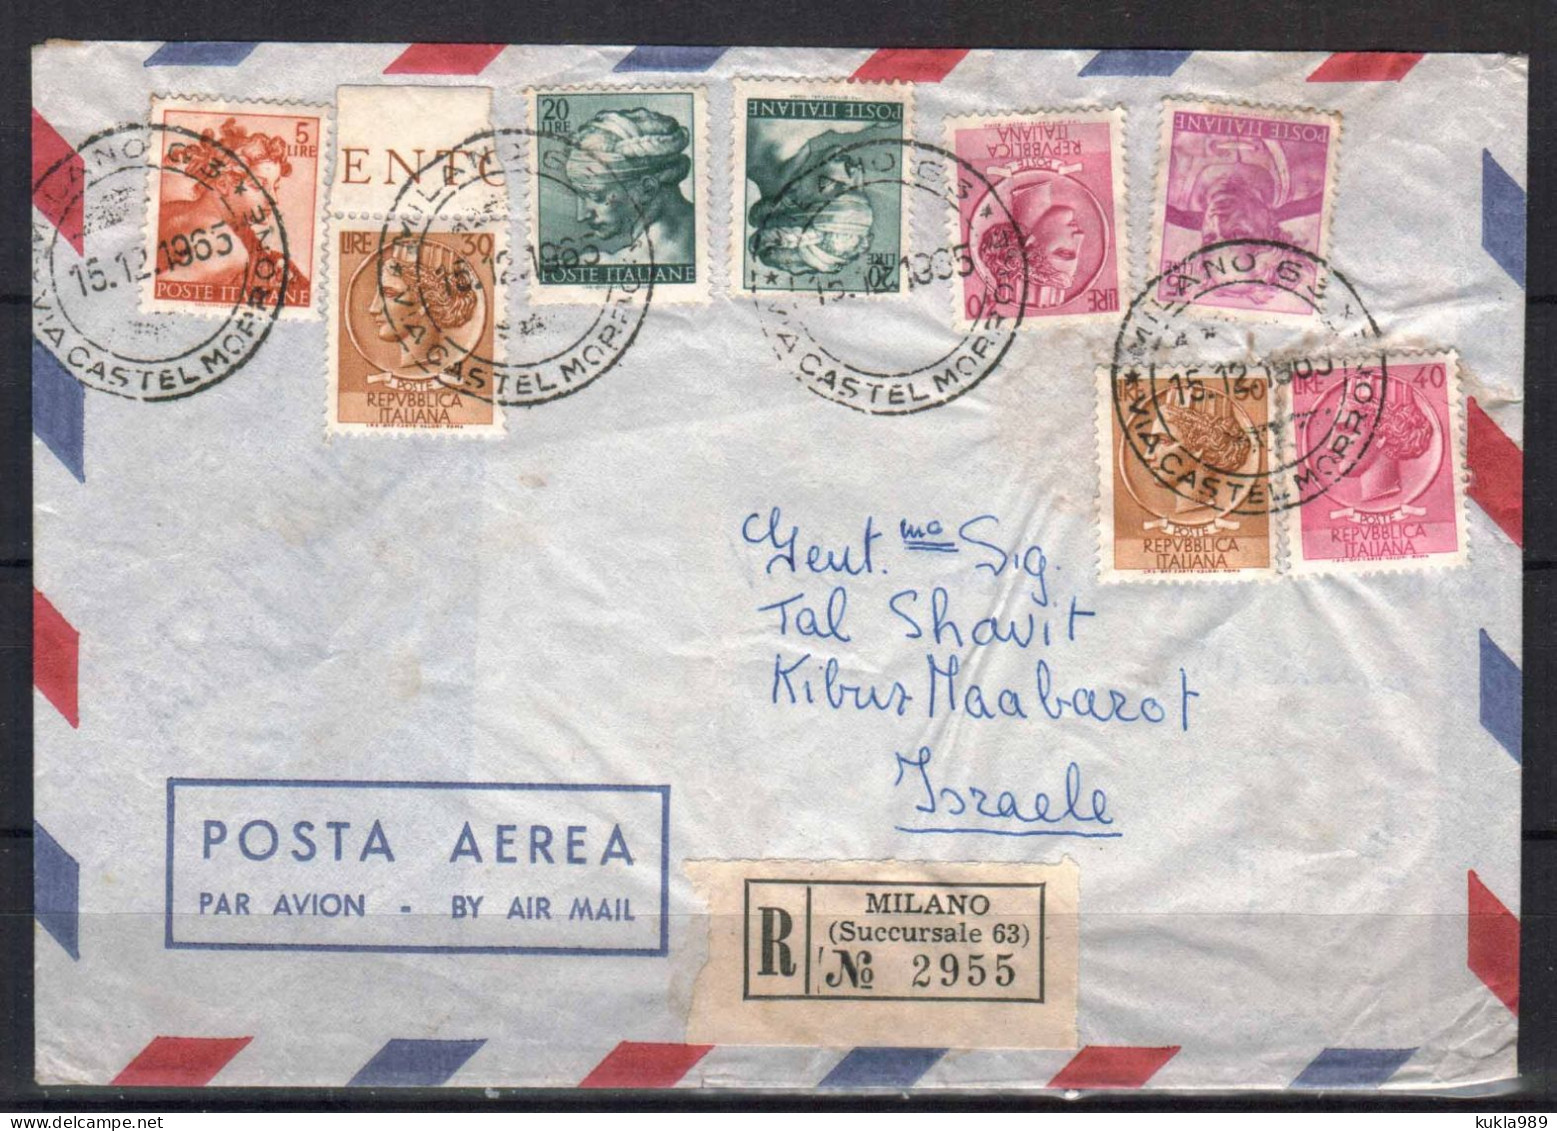 ITALY STAMPS. 1965 REG. COVER TO ISRAEL - Posta Aerea